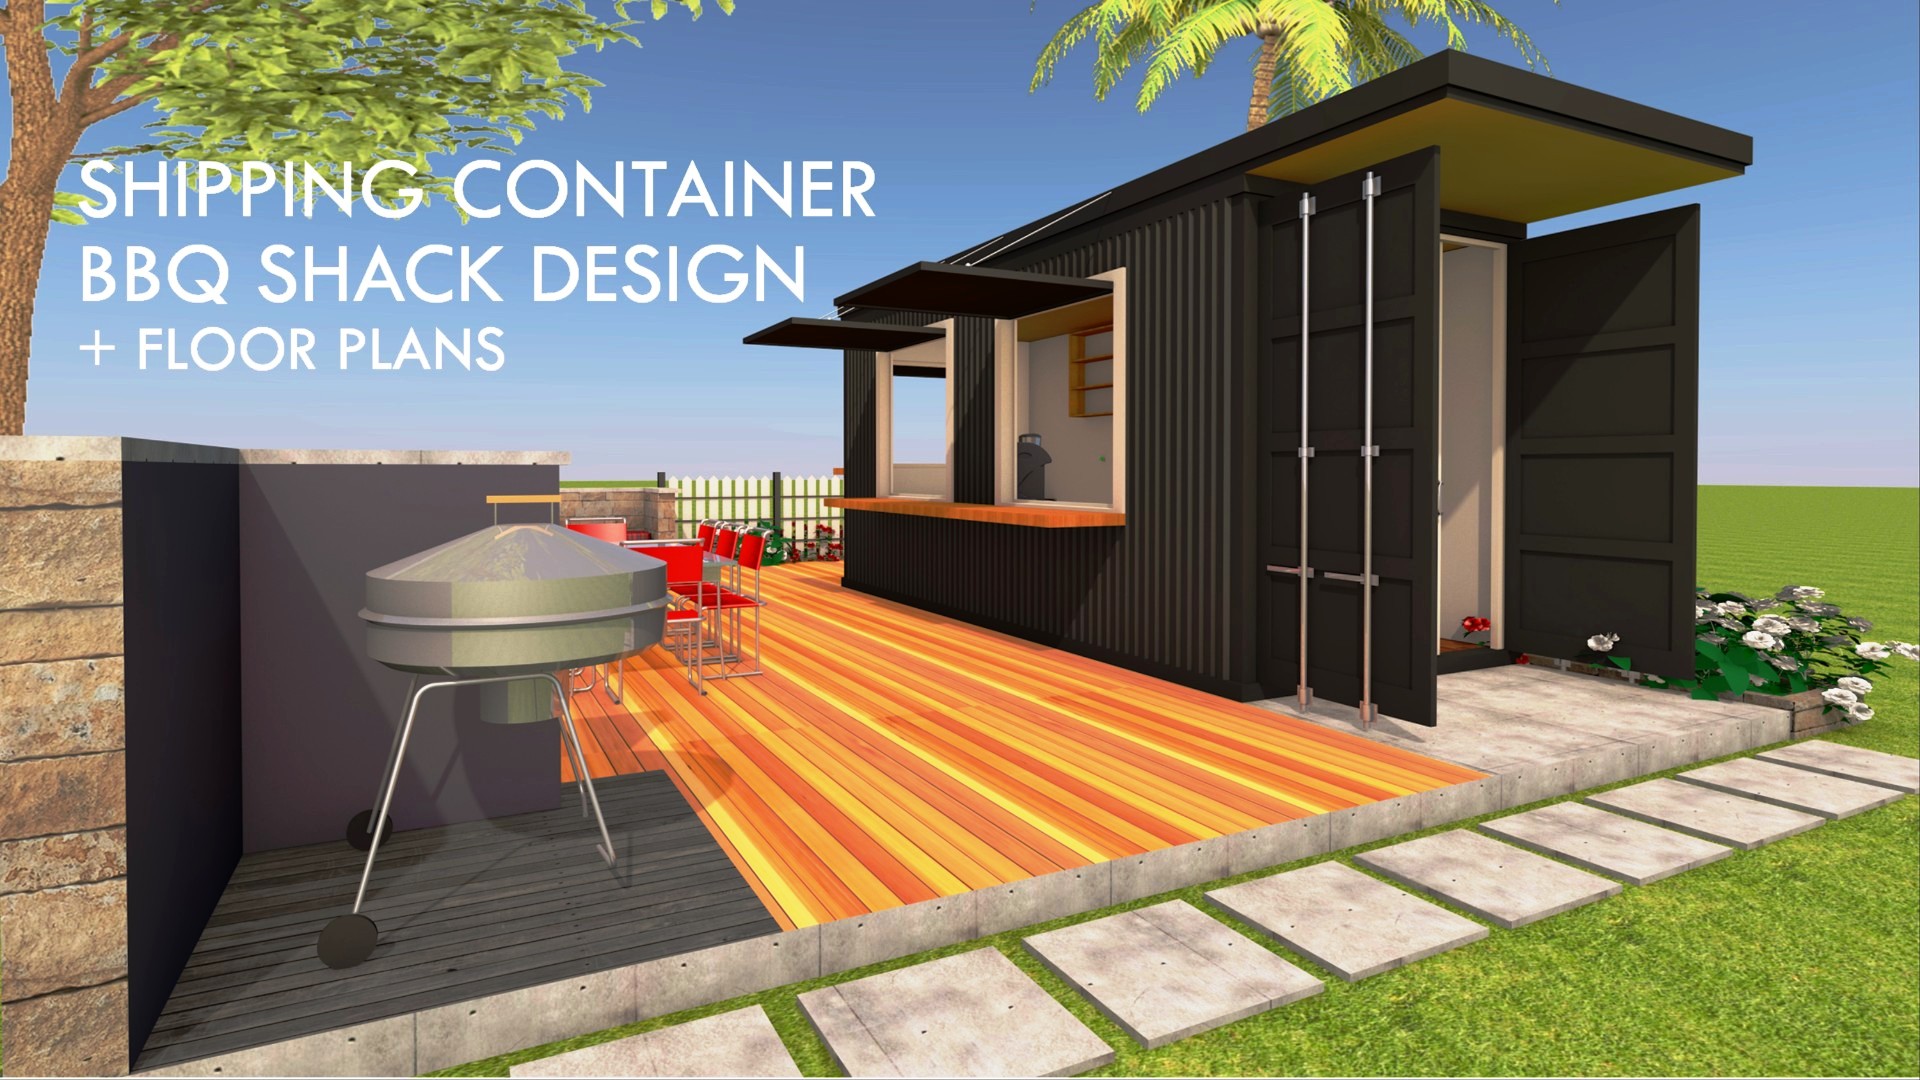 https://www.thearchitainer.com/wp-content/uploads/2018/05/sheltermode-shipping-container-prefab-homes-35.jpg